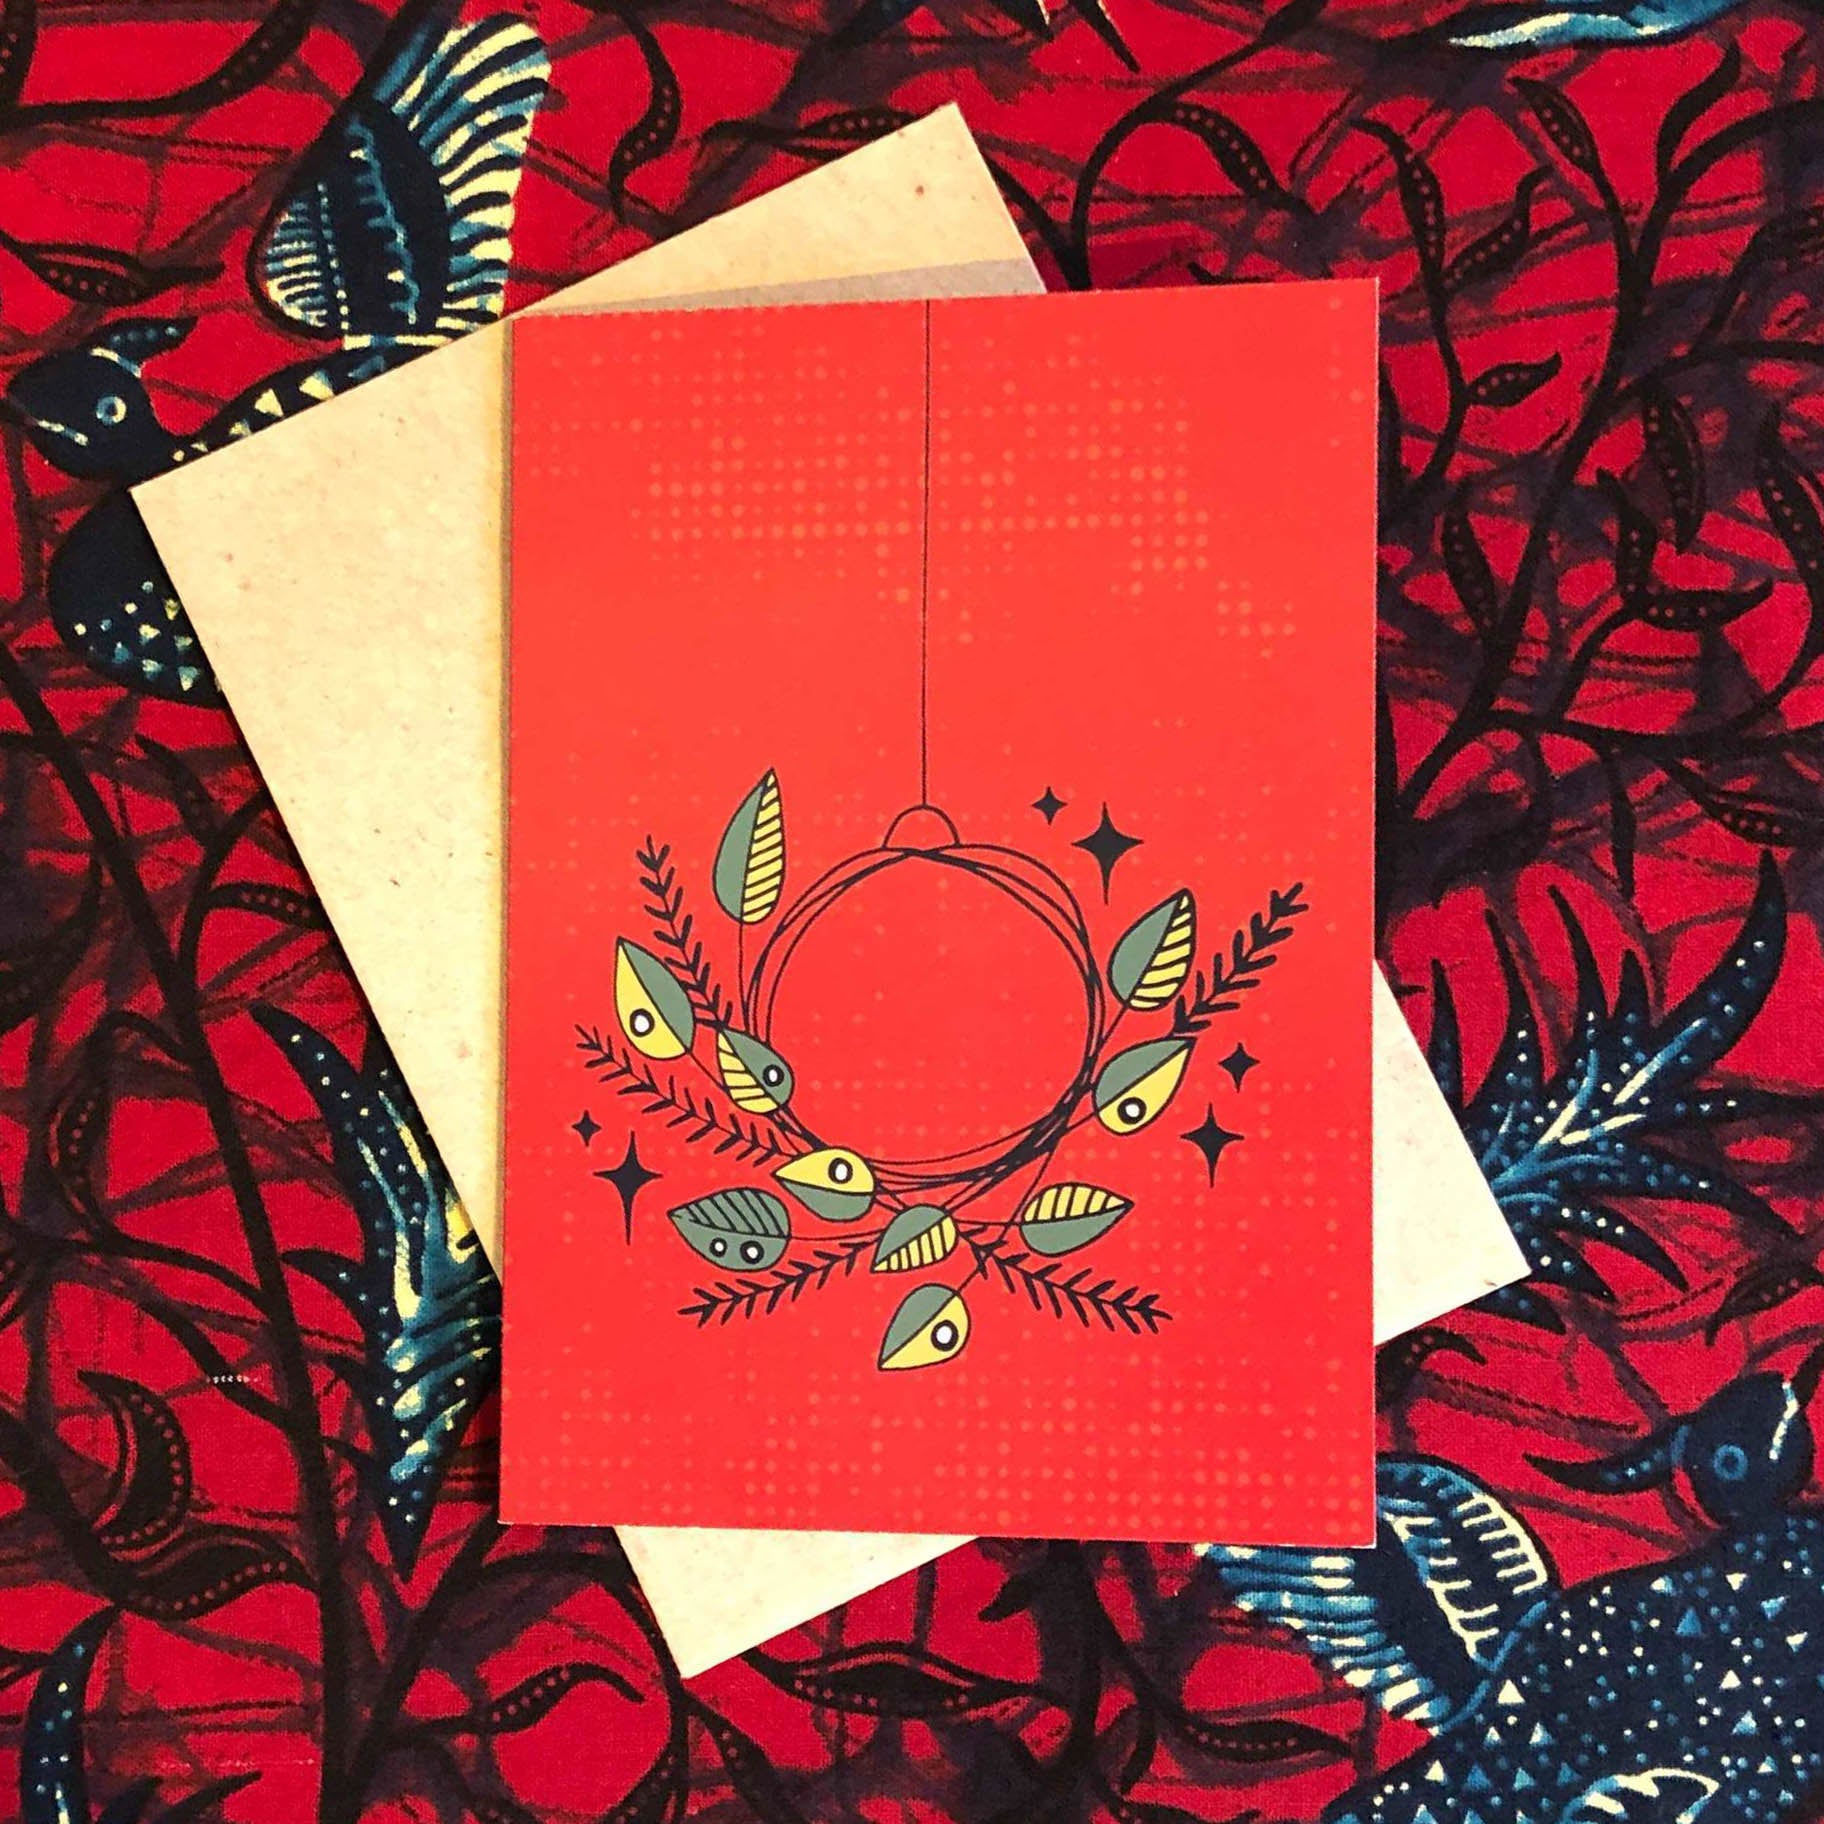 Red colored greeting card with green and yellow wreath